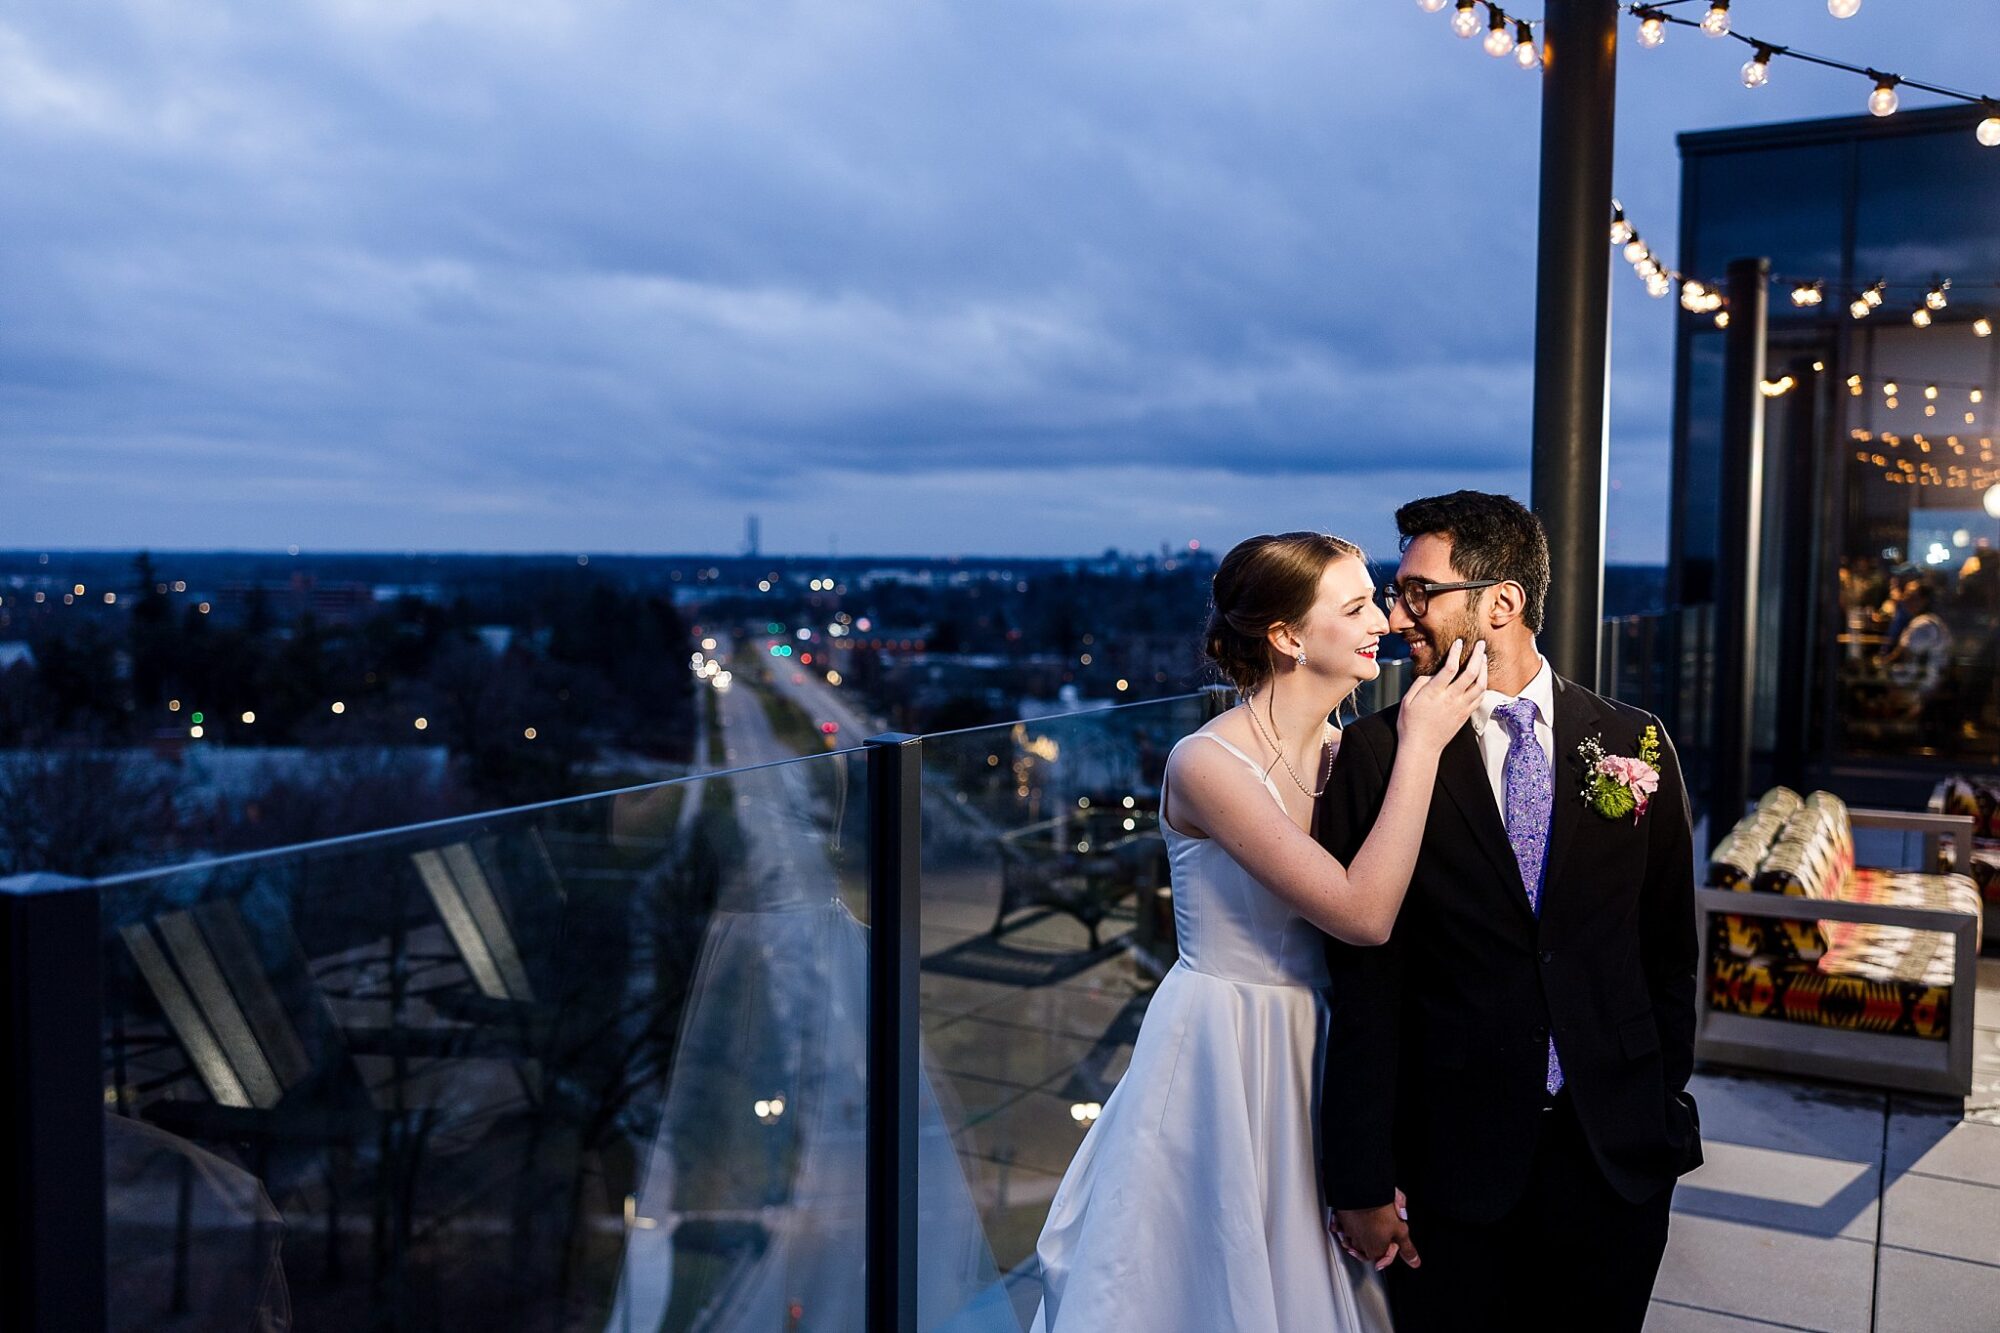 Wedding photographs of a bride and groom smiling while standing on the rooftop at the Graduate Hotel in East Lansing, Michigan at night with blue clouds